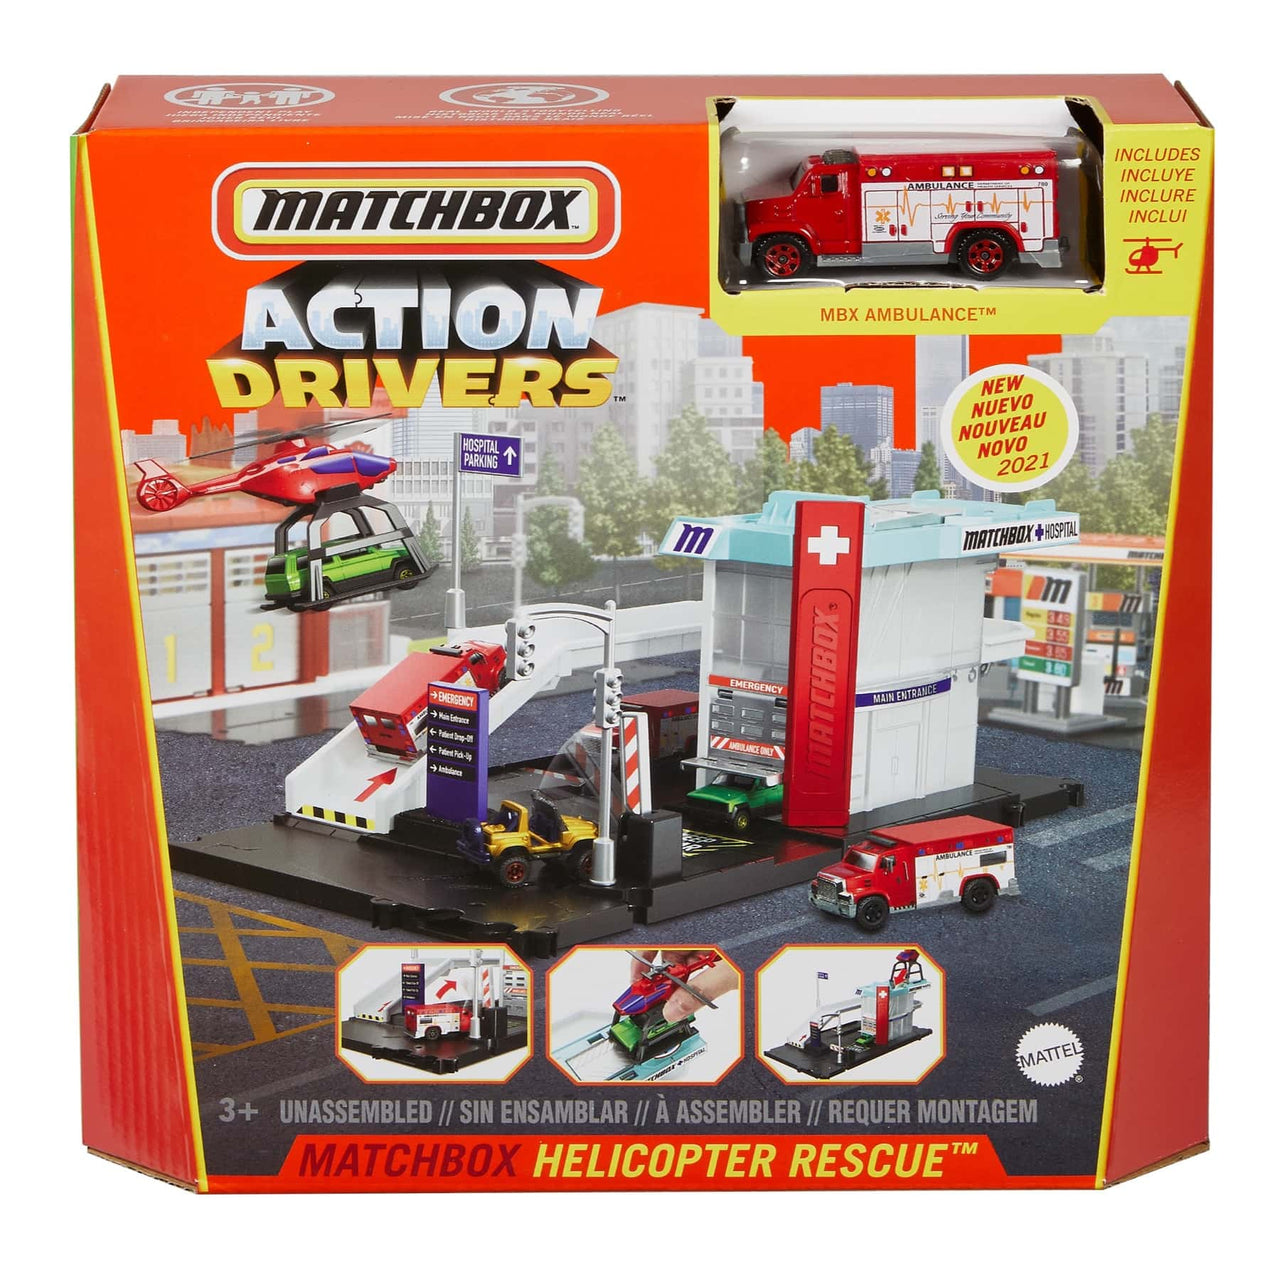 Matchbox Action Drivers Helicopter Rescue Set